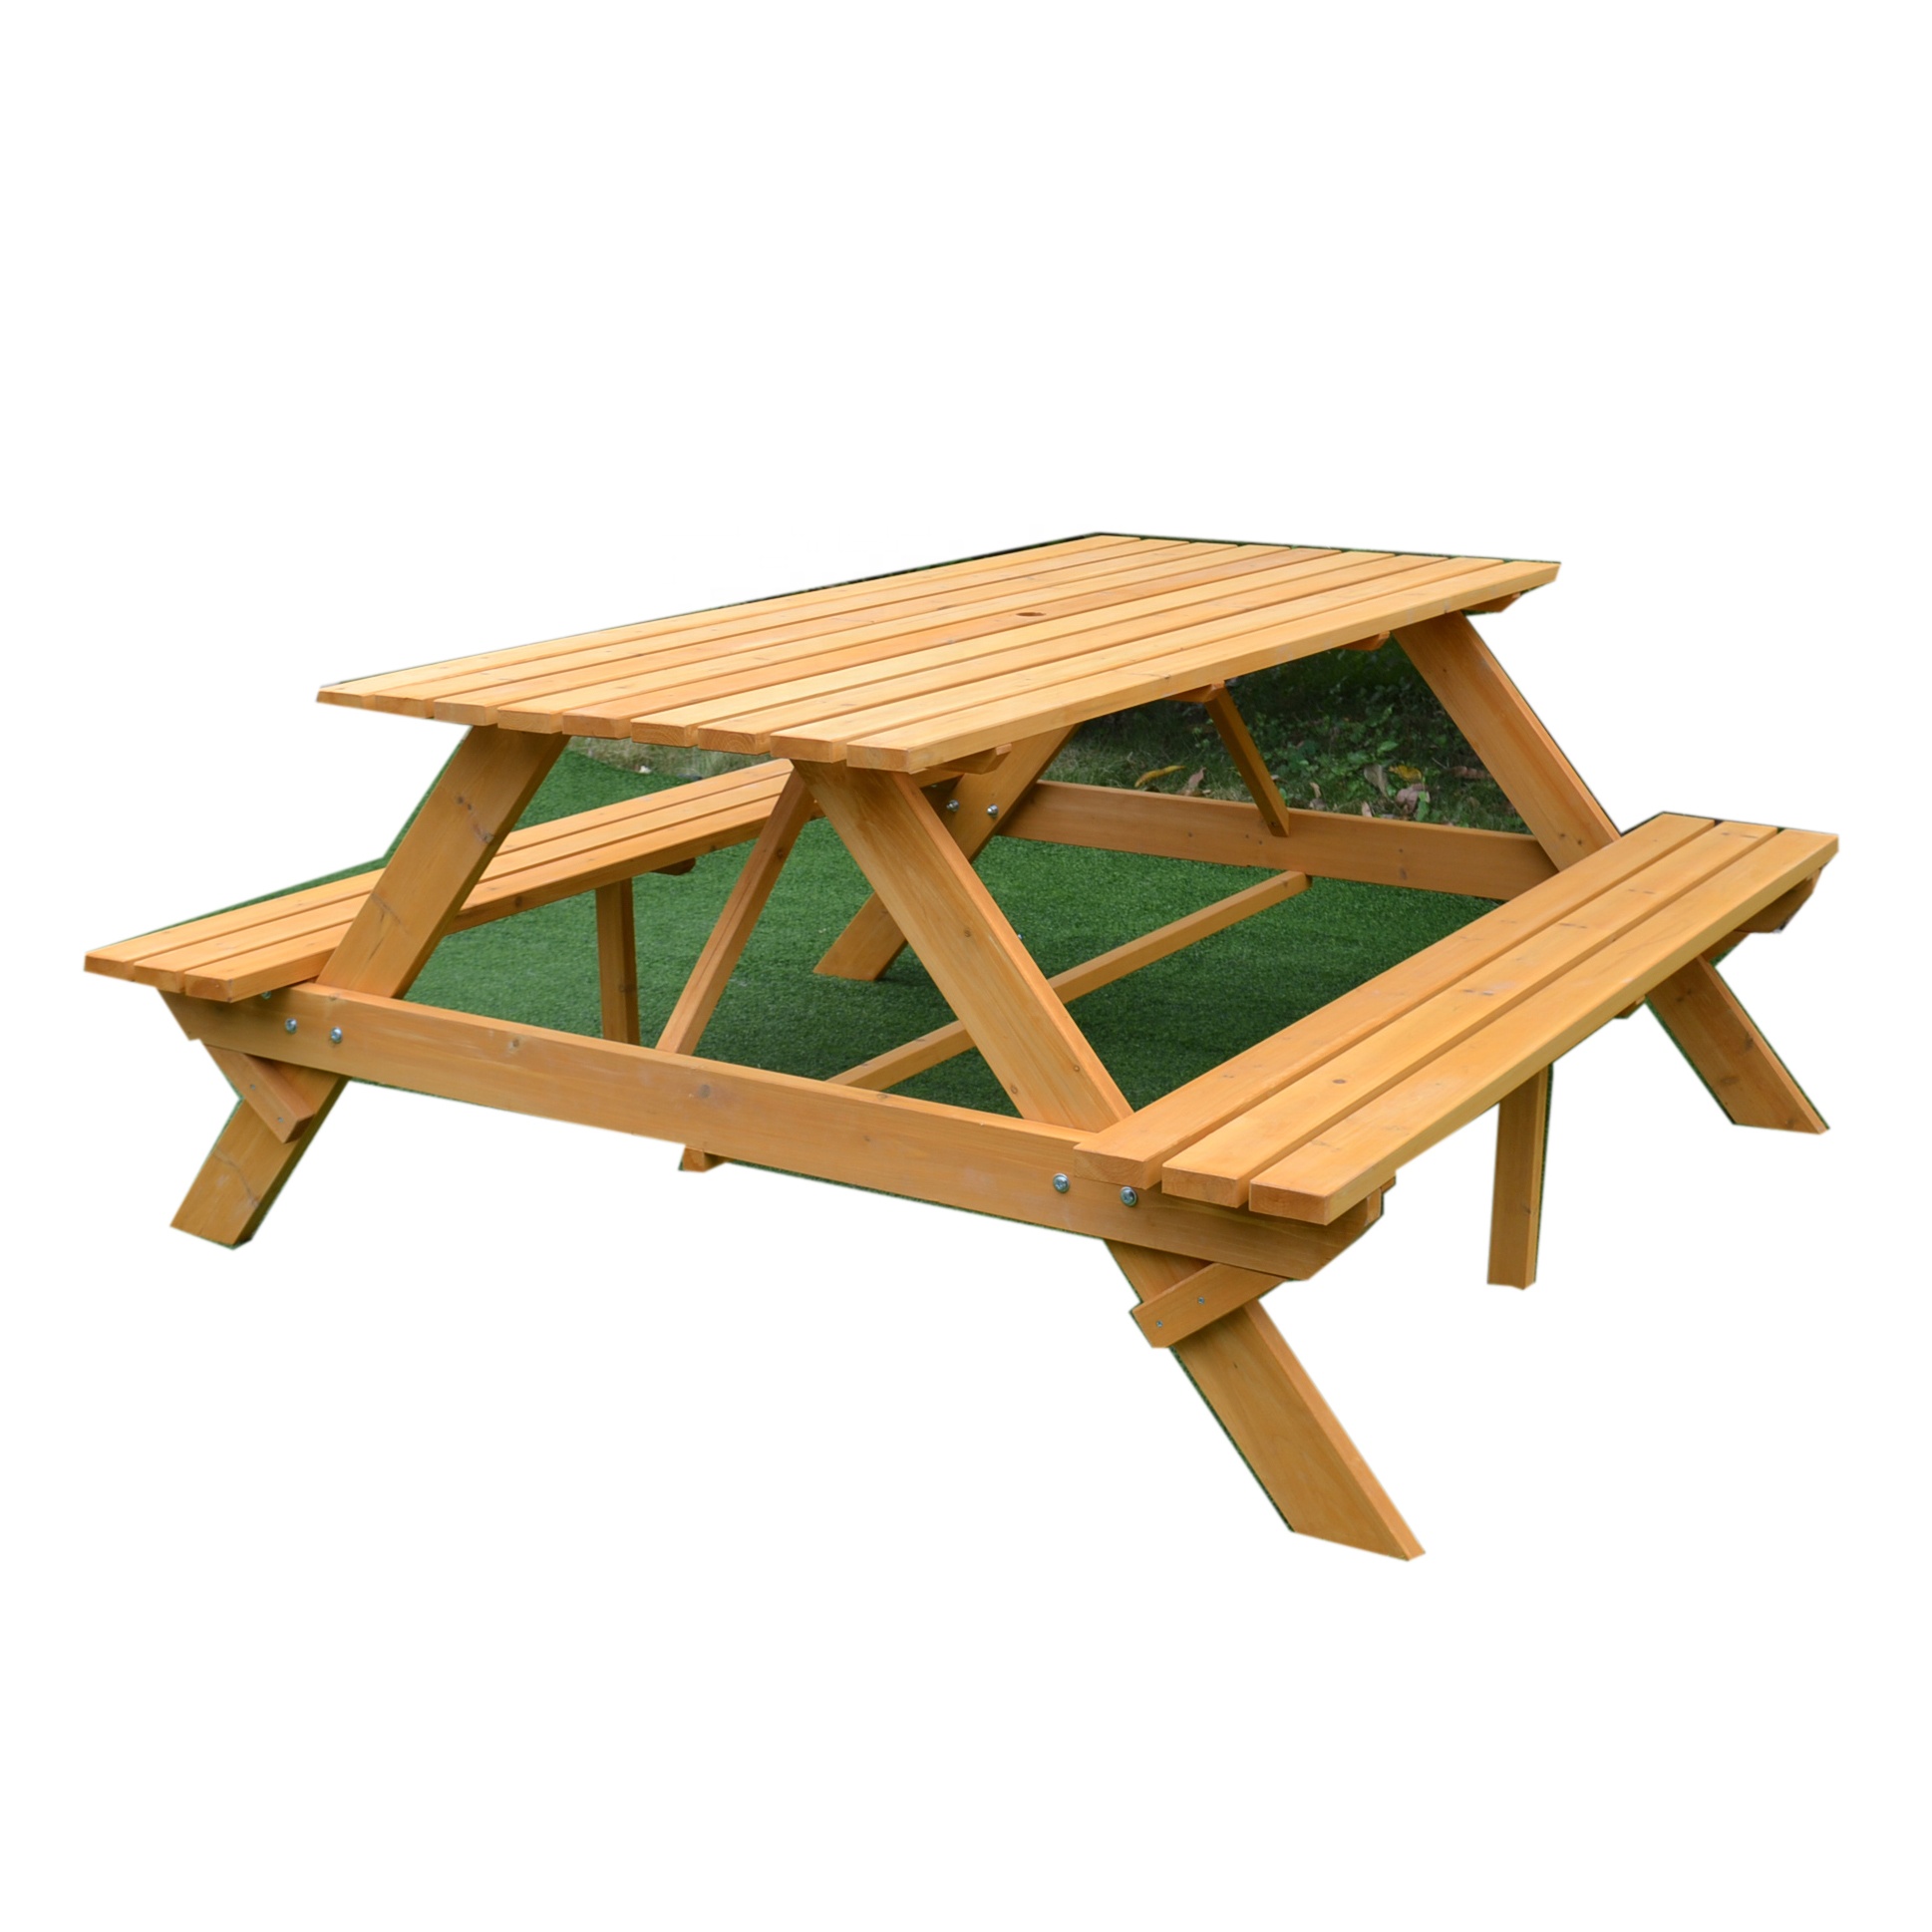 factory wholesale Garden Furniture Wood Picnic Table Set bench chairs